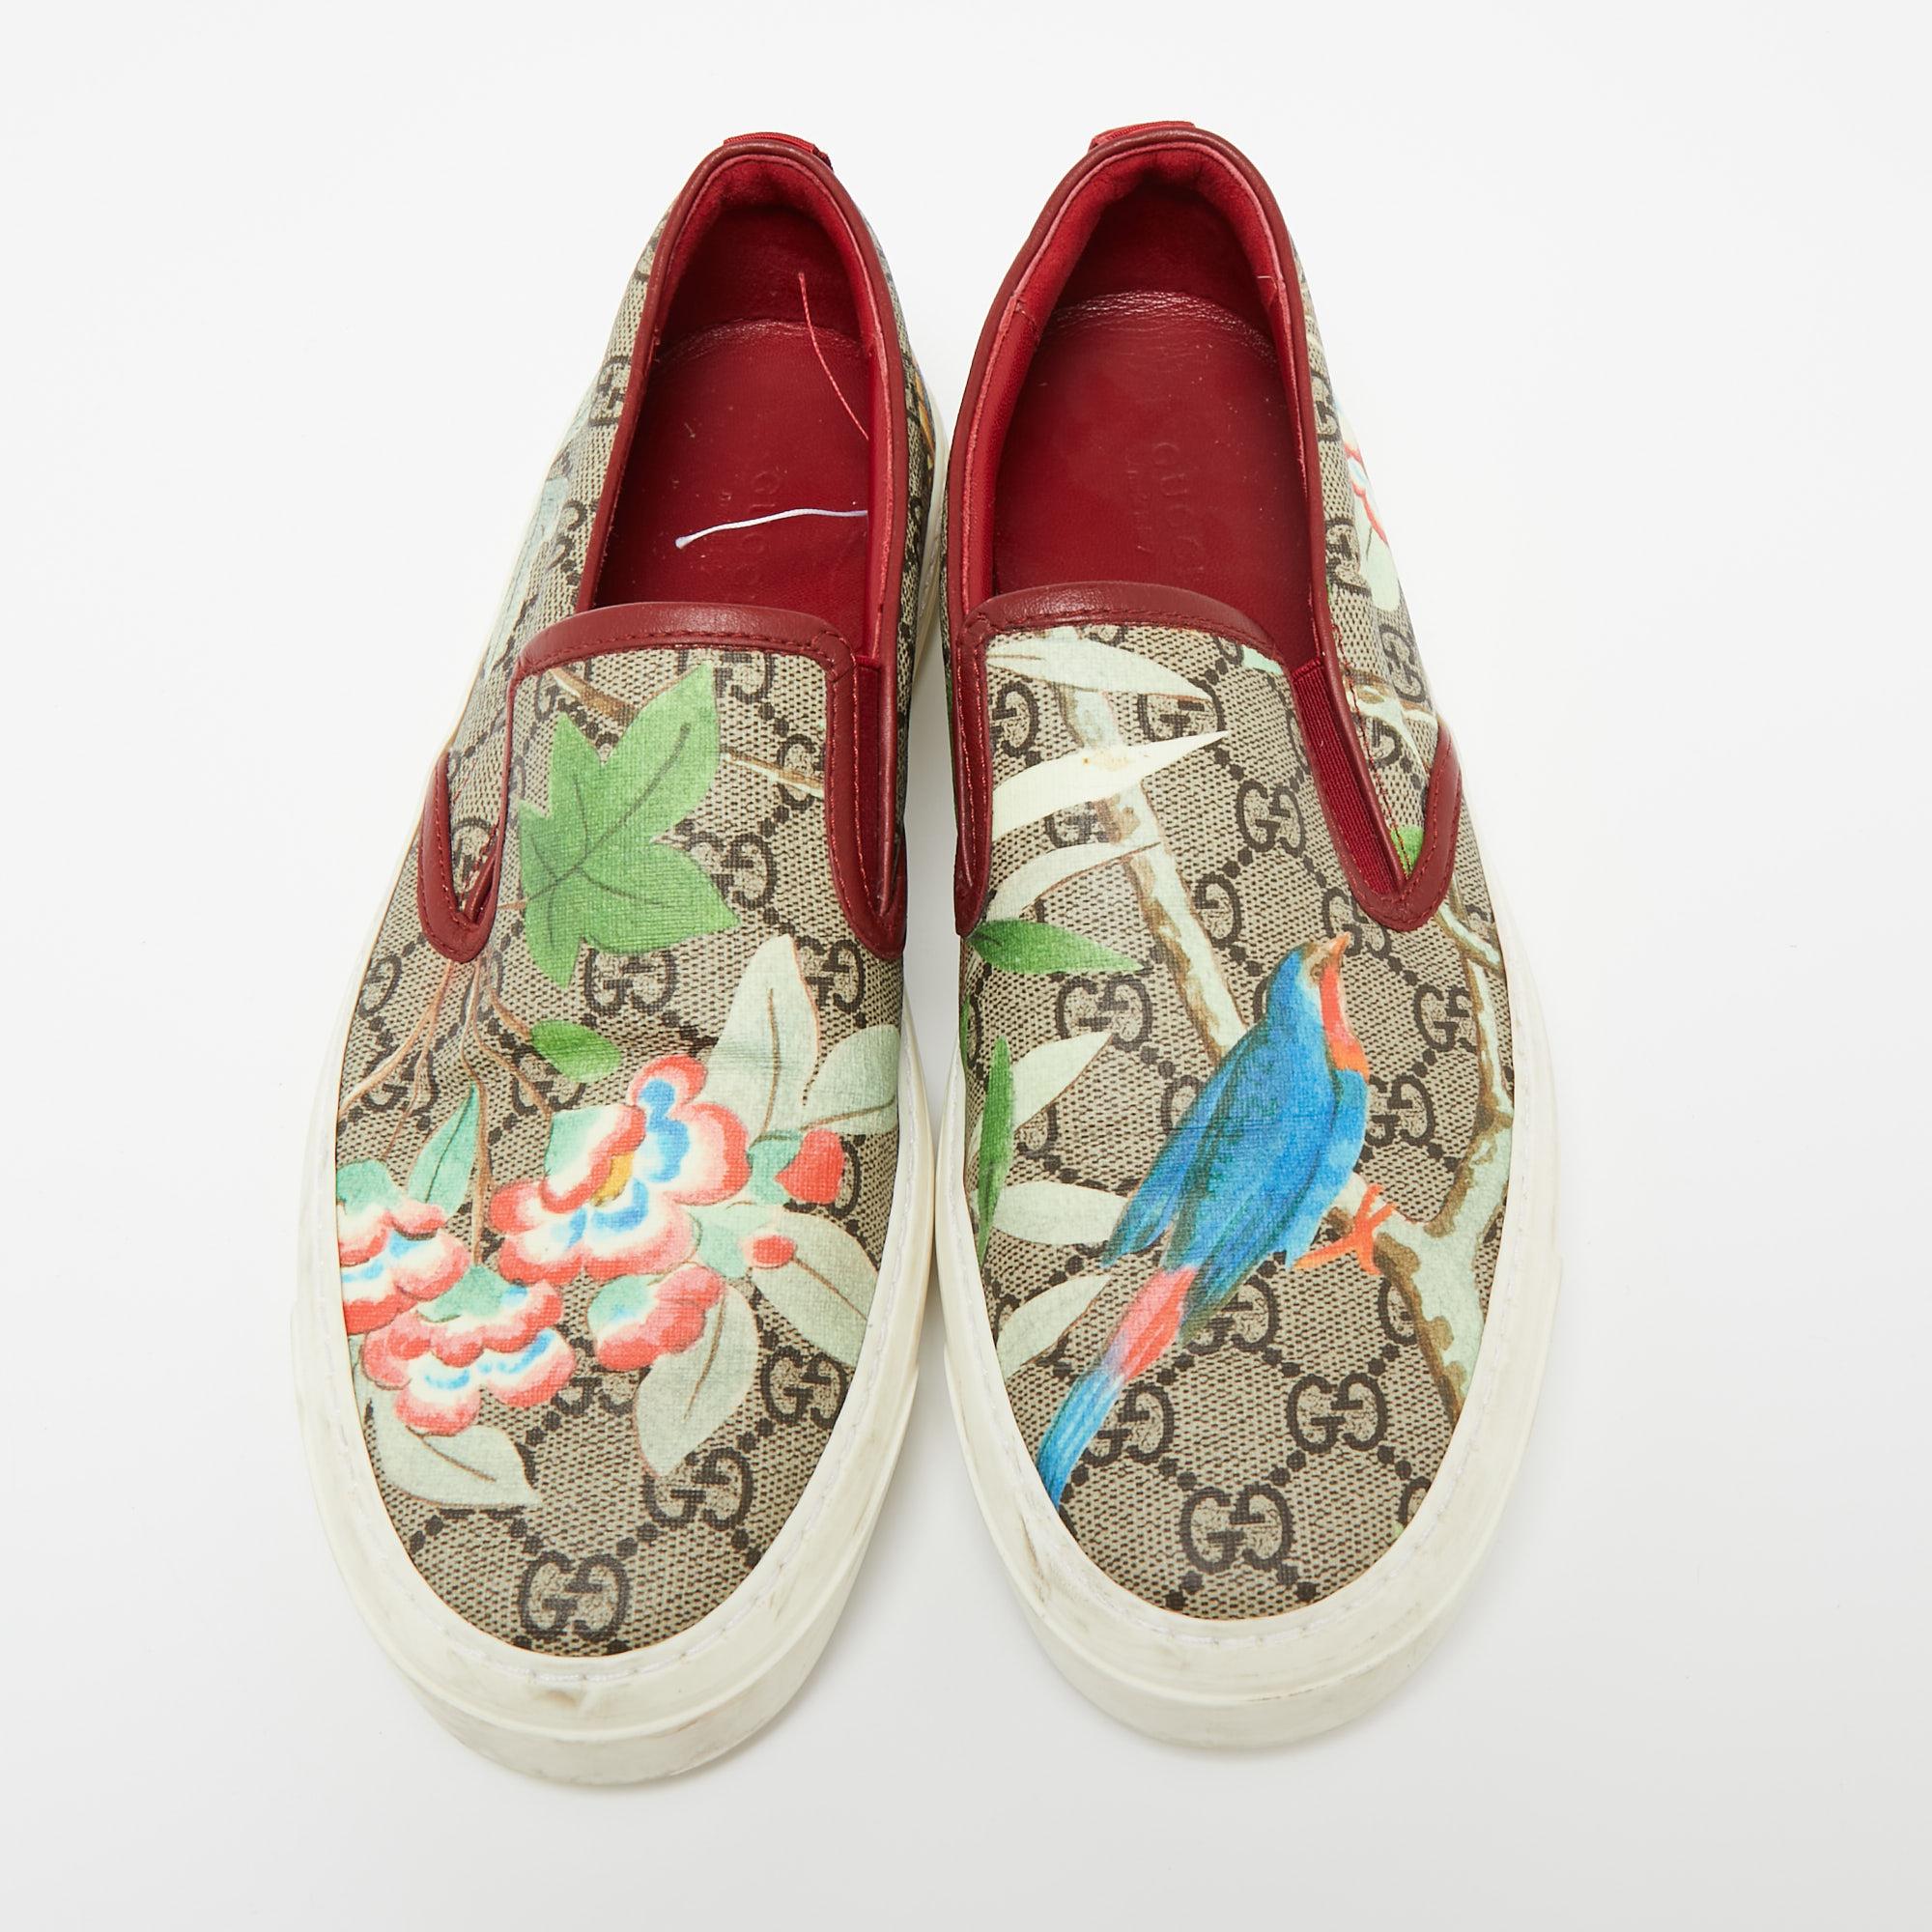 These multicolored sneakers from Gucci are truly a maker of trends. The sneakers are designed in a low-top design using GG Supreme canvas that flaunts blooming floral prints. Set on durable rubber soles, this pair is high in comfort and style, just